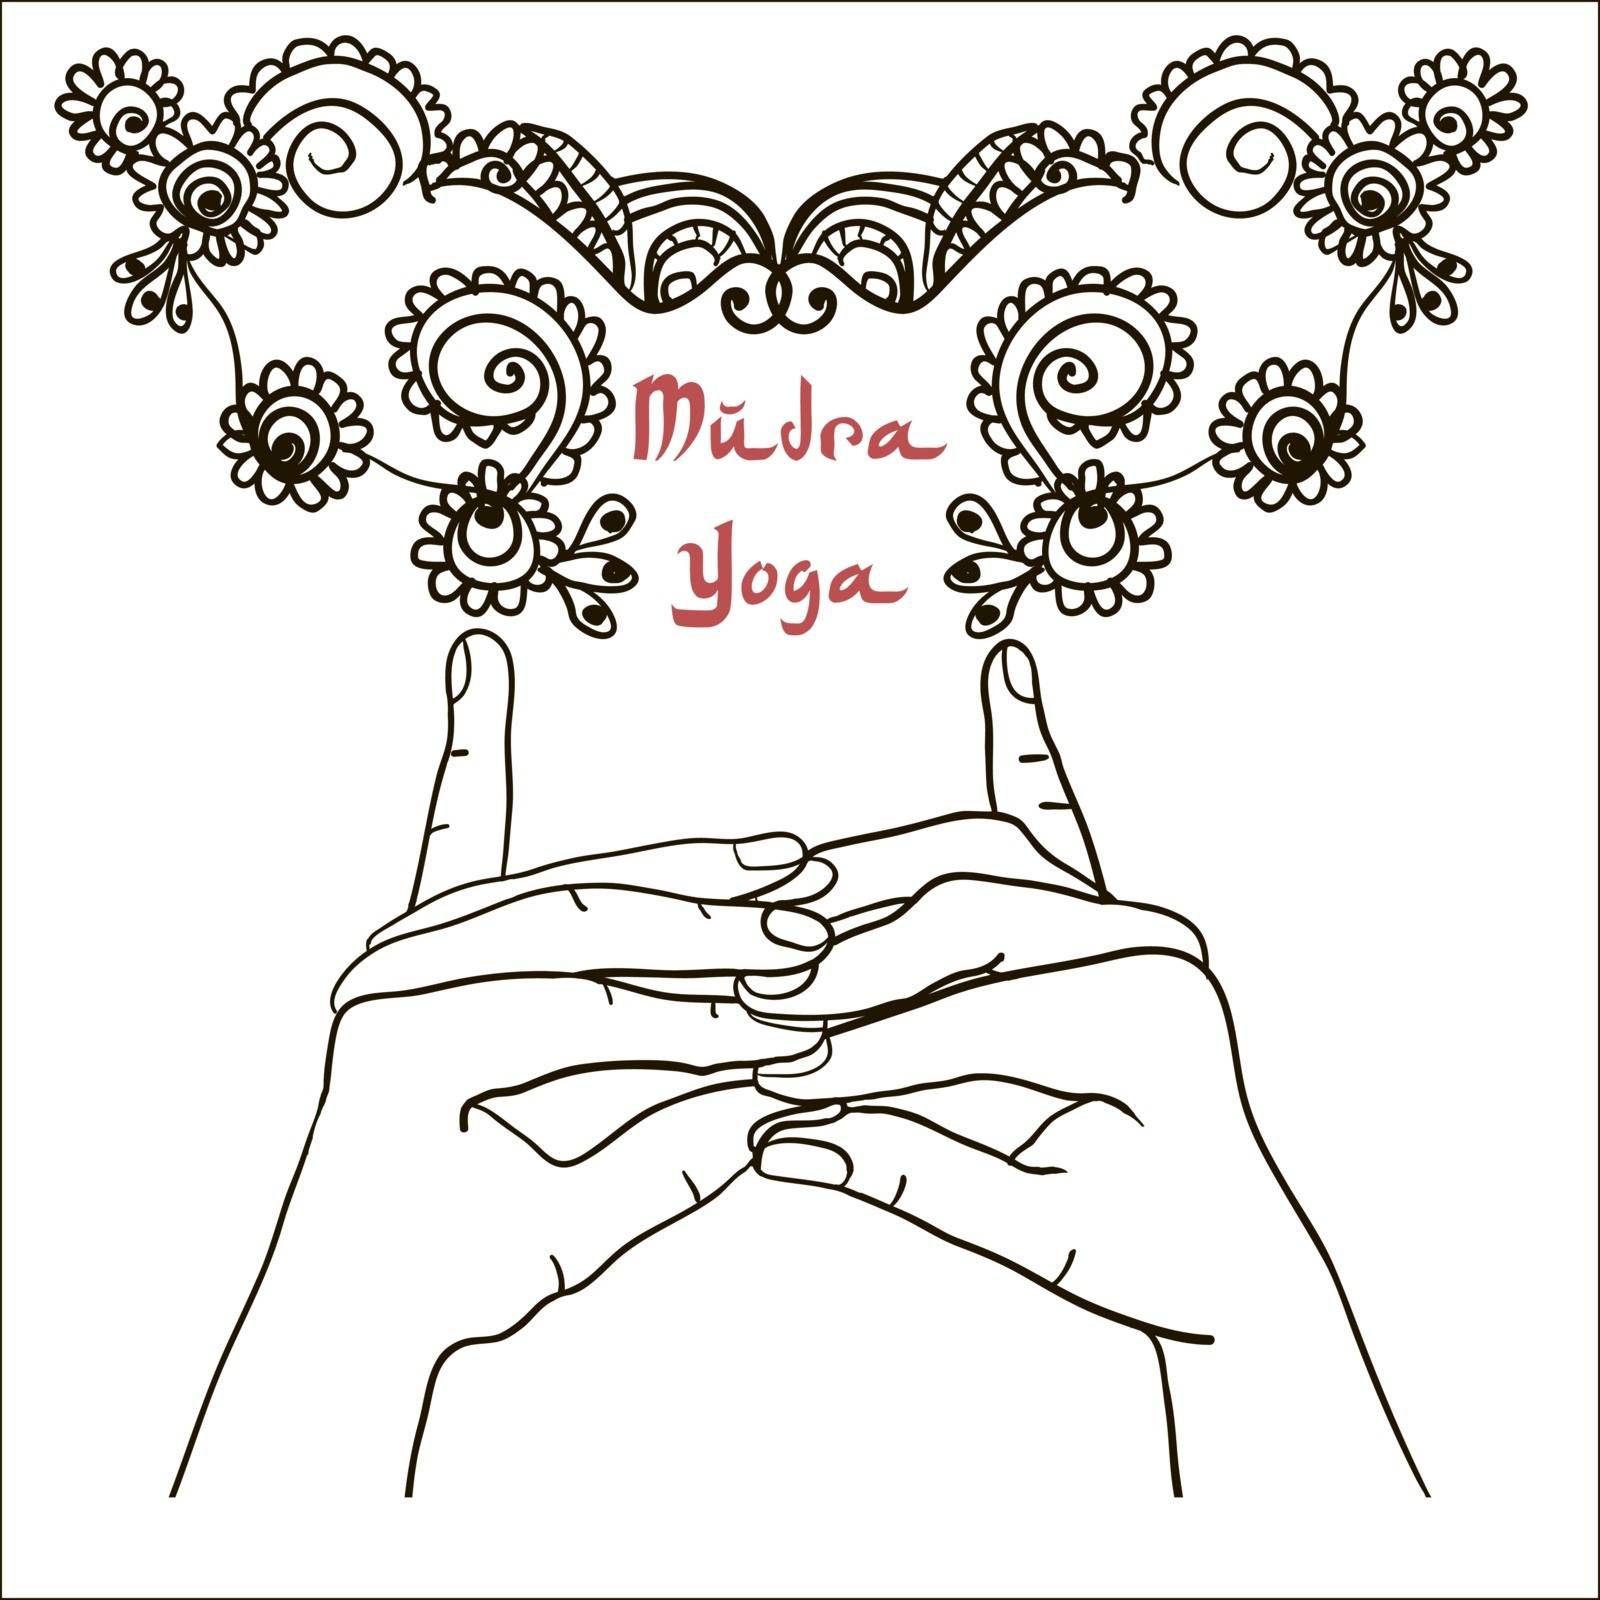 Element yoga Stairway Heaven Temple mudra hands with mehendi patterns. Vector illustration for a yoga studio, tattoo, spa, postcards, souvenirs. 